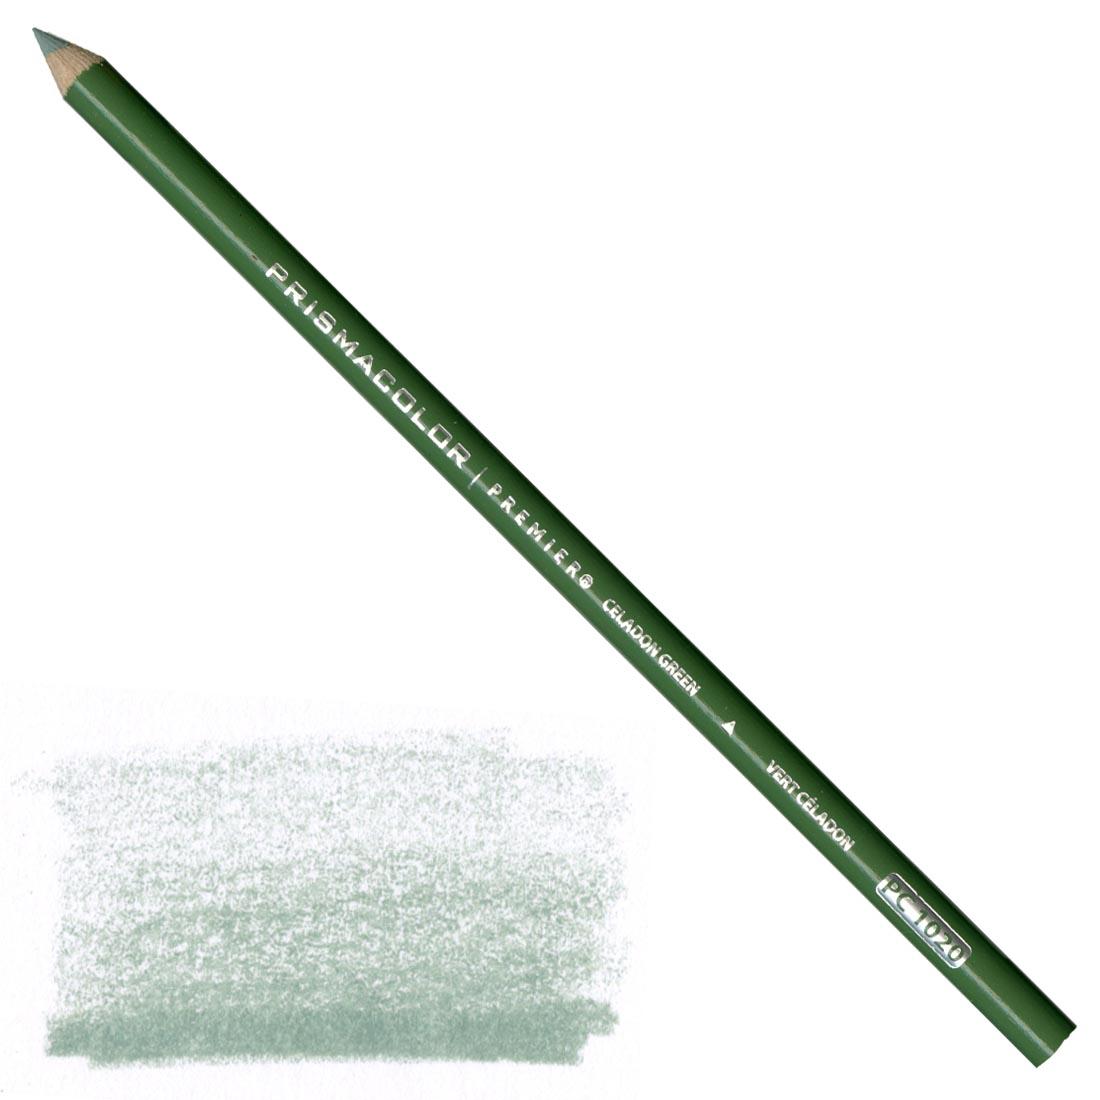 Celadon Green Prismacolor Premier Colored Pencil with a sample colored swatch